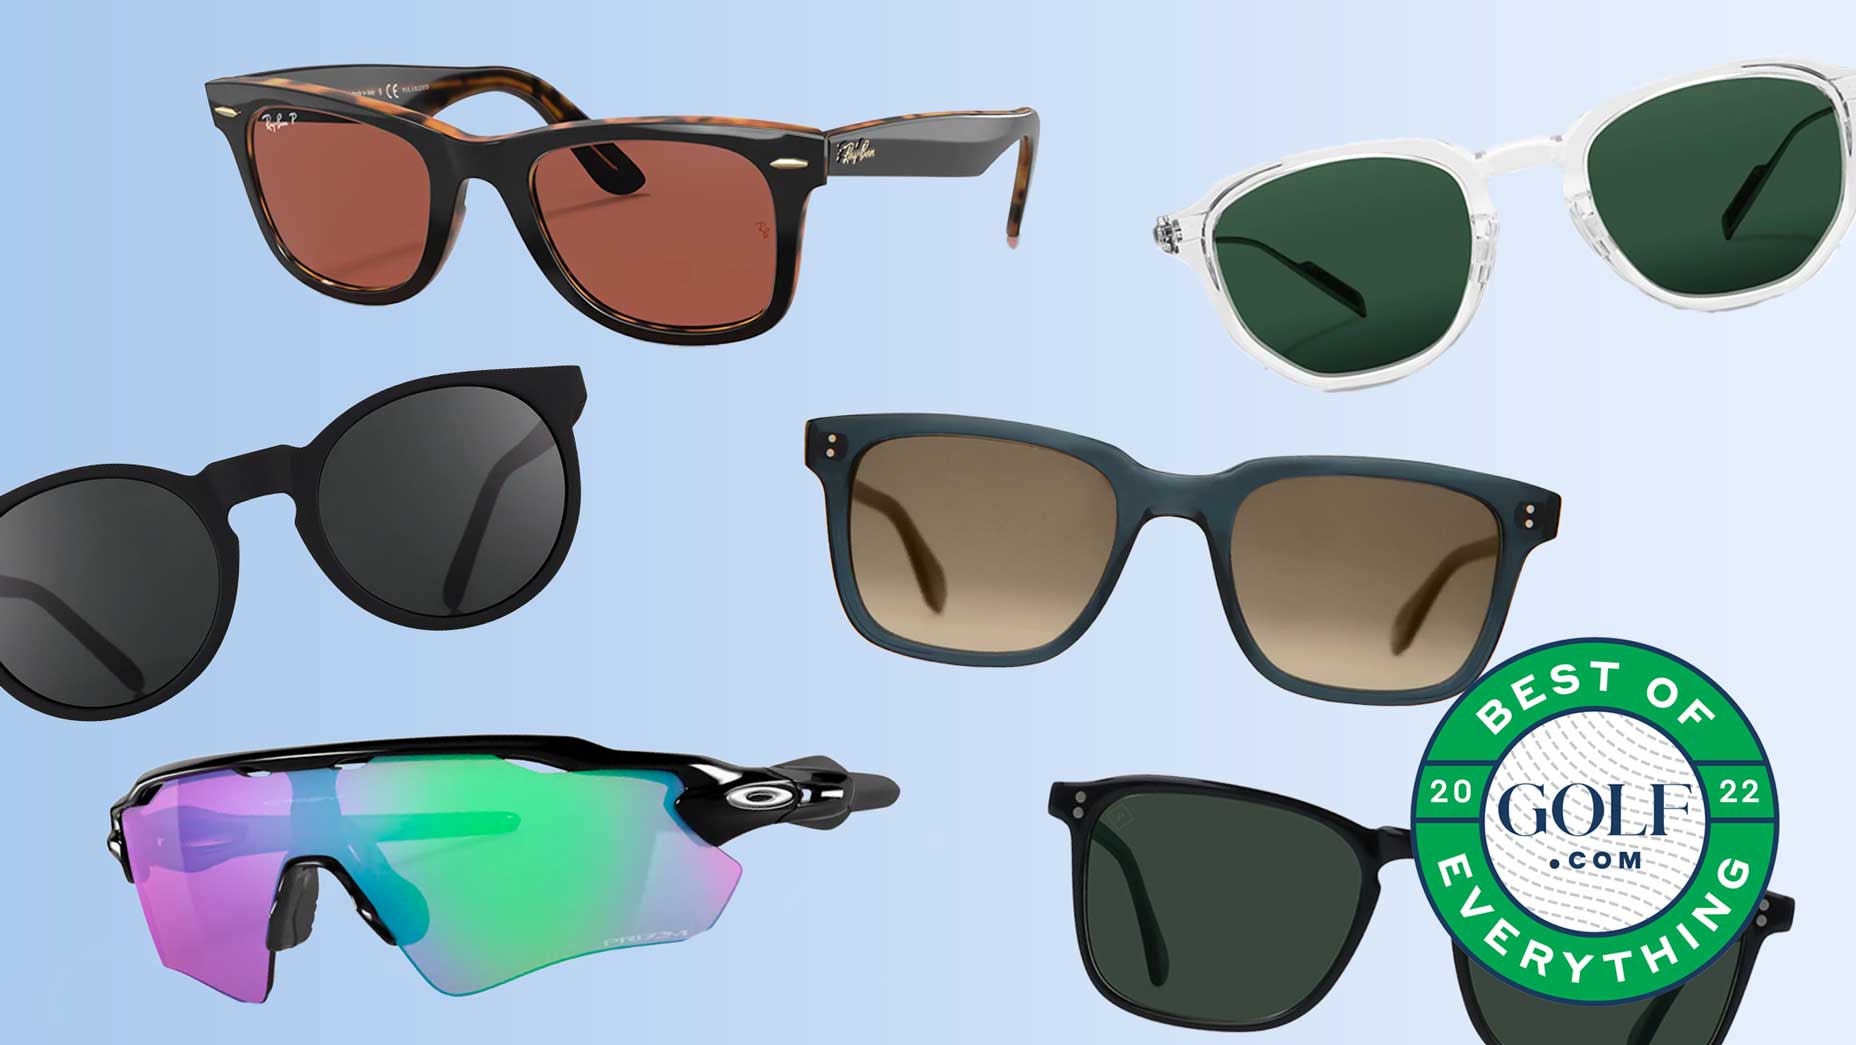 Best Sunglasses 2022: The 6 best sunglasses to wear on or off the